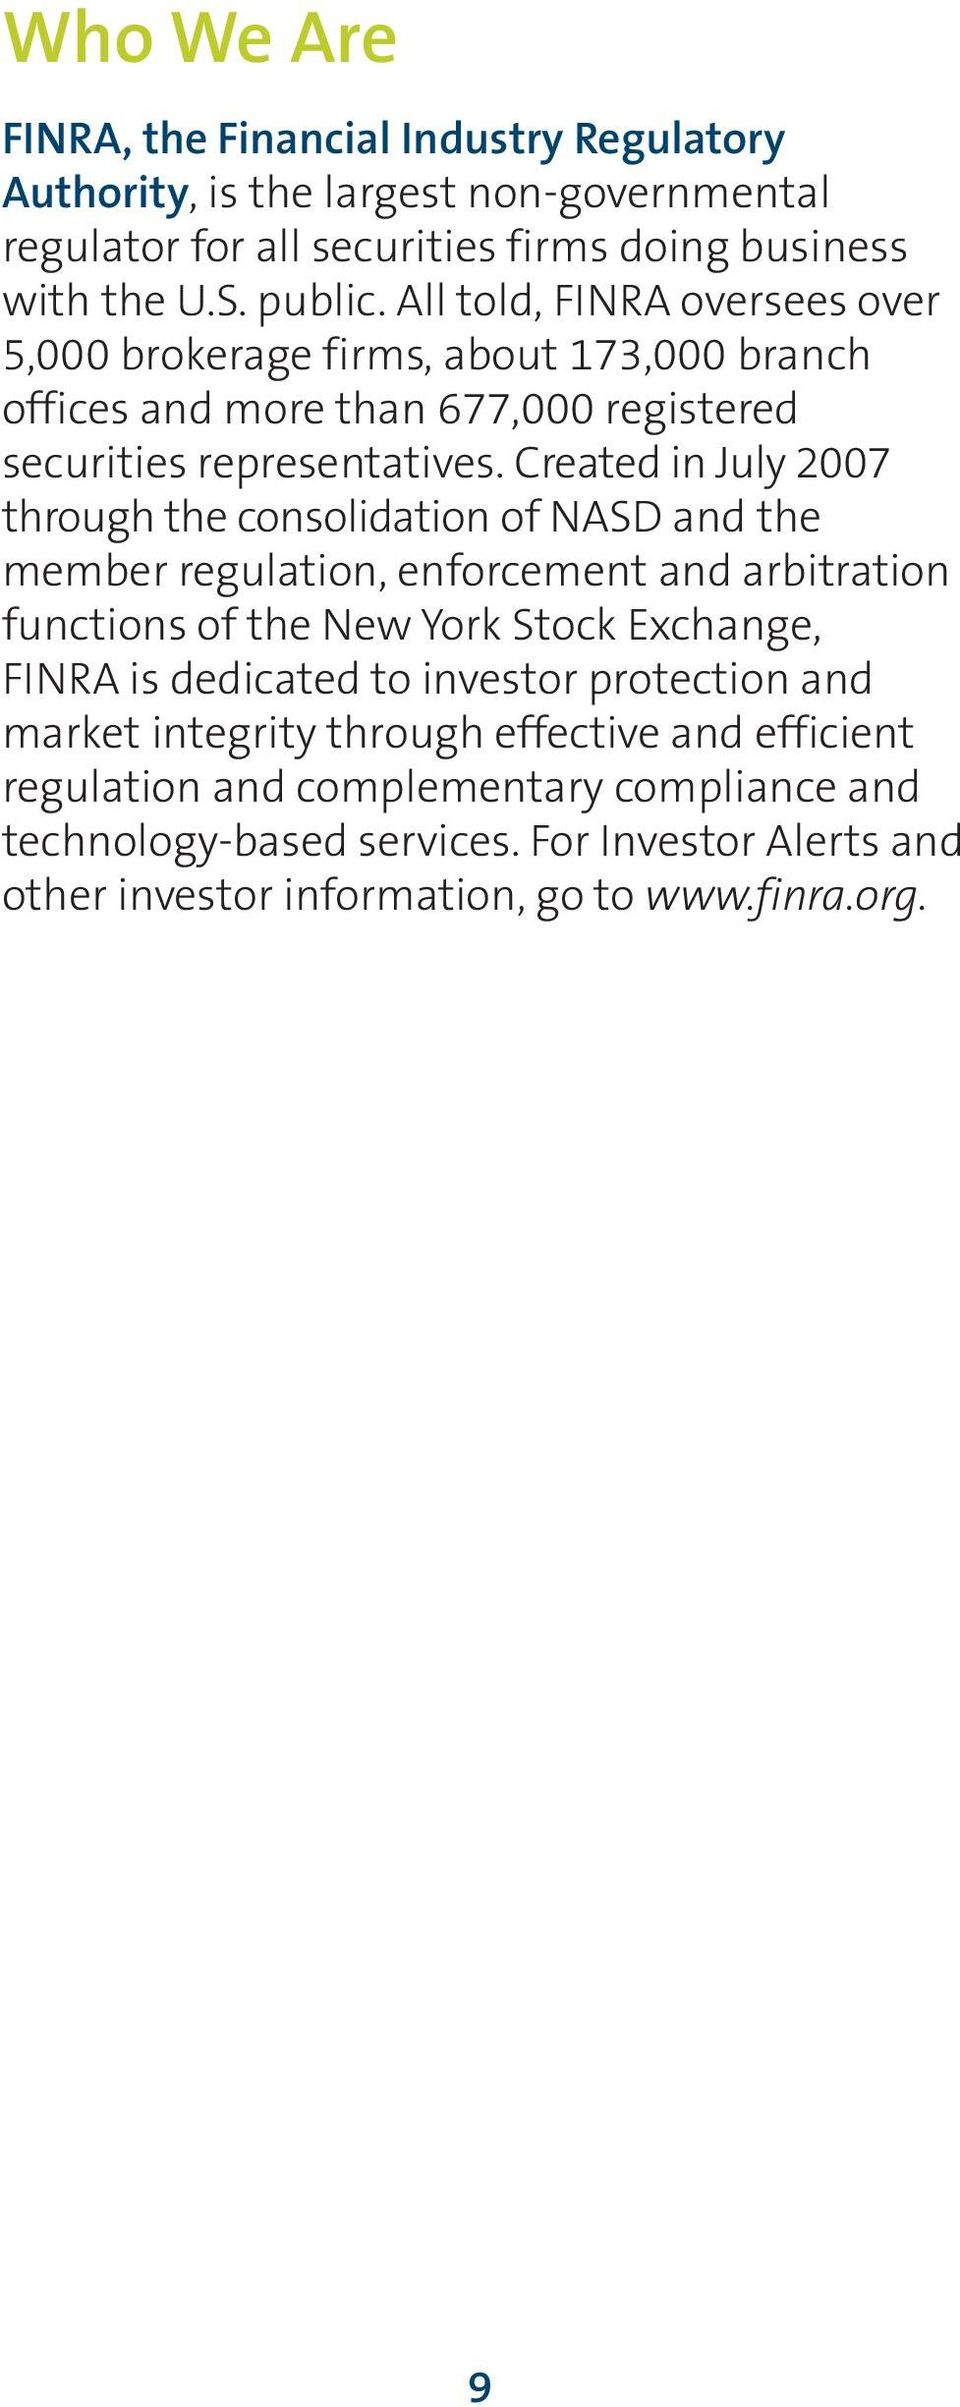 Created in July 2007 through the consolidation of NASD and the member regulation, enforcement and arbitration functions of the New York Stock Exchange, FINRA is dedicated to